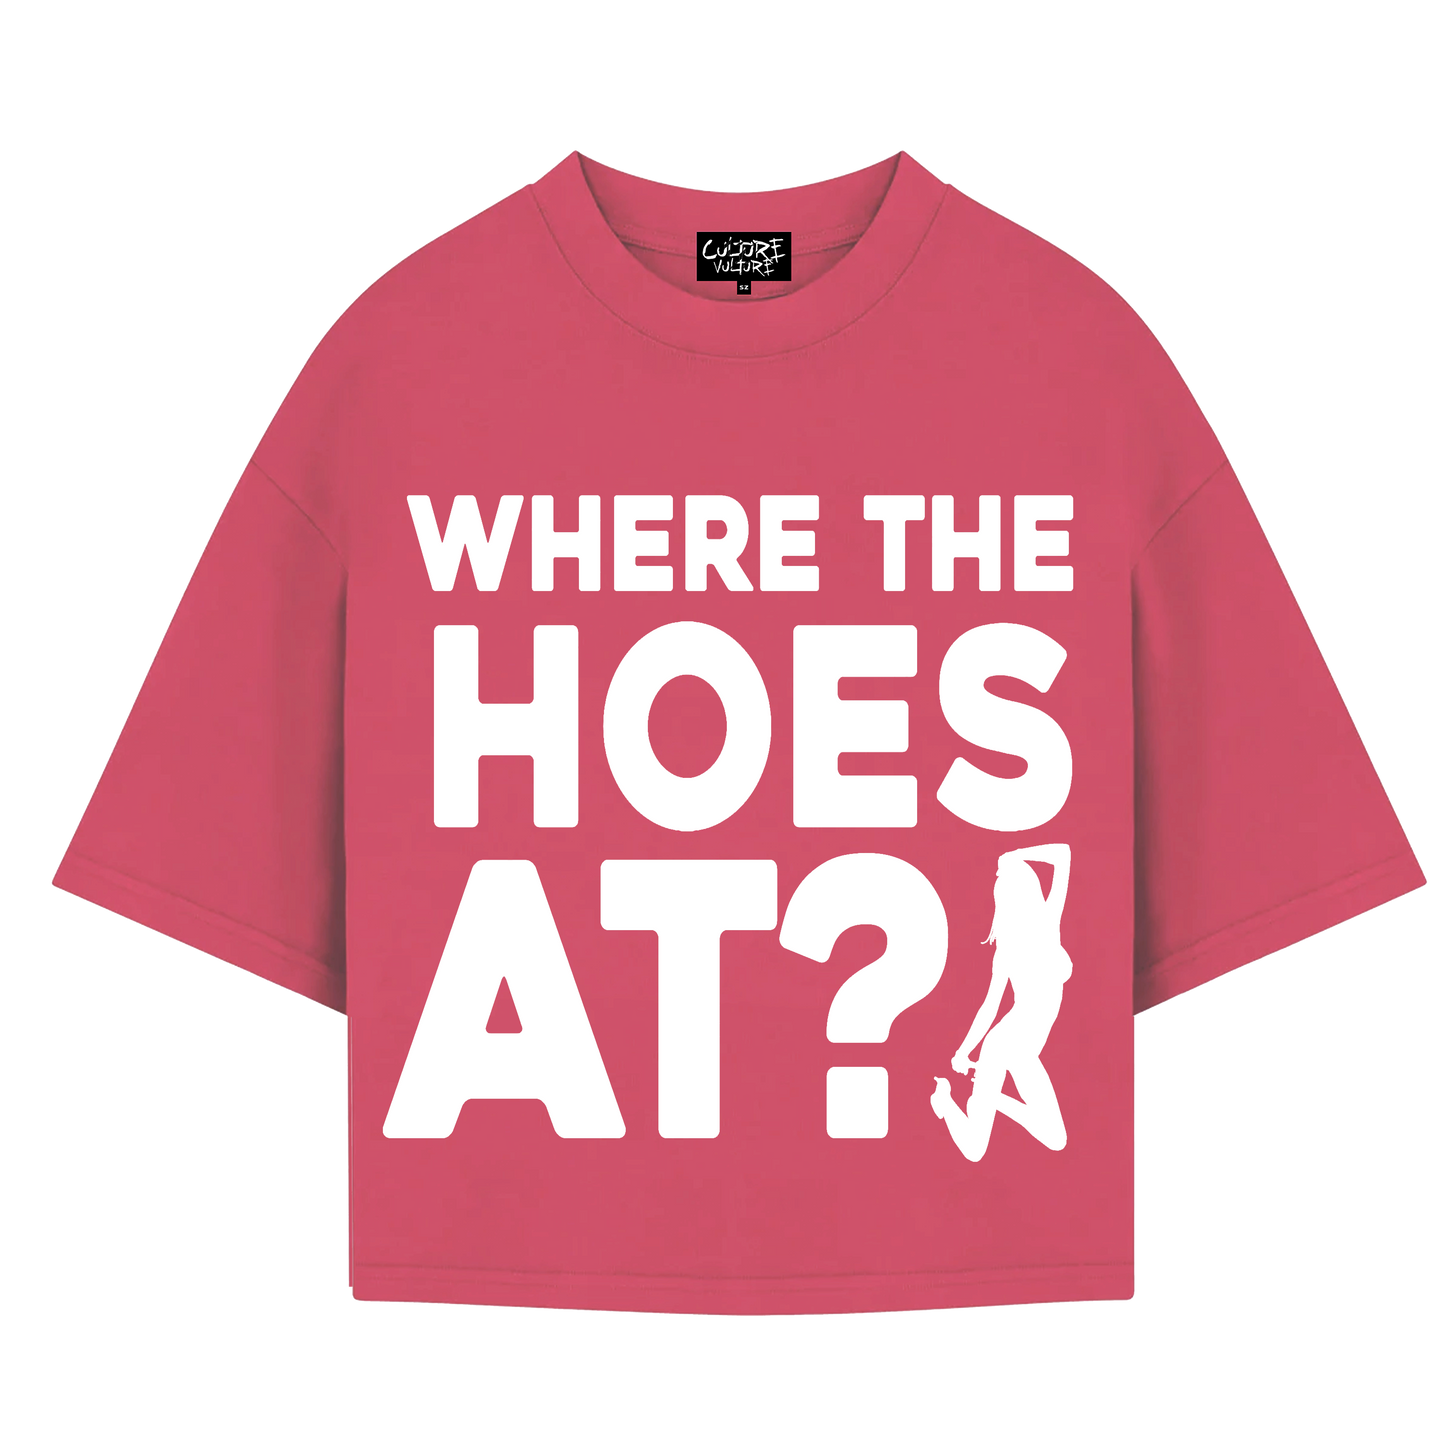 "WHERE THE HOES AT" TEE (RUST PINK)